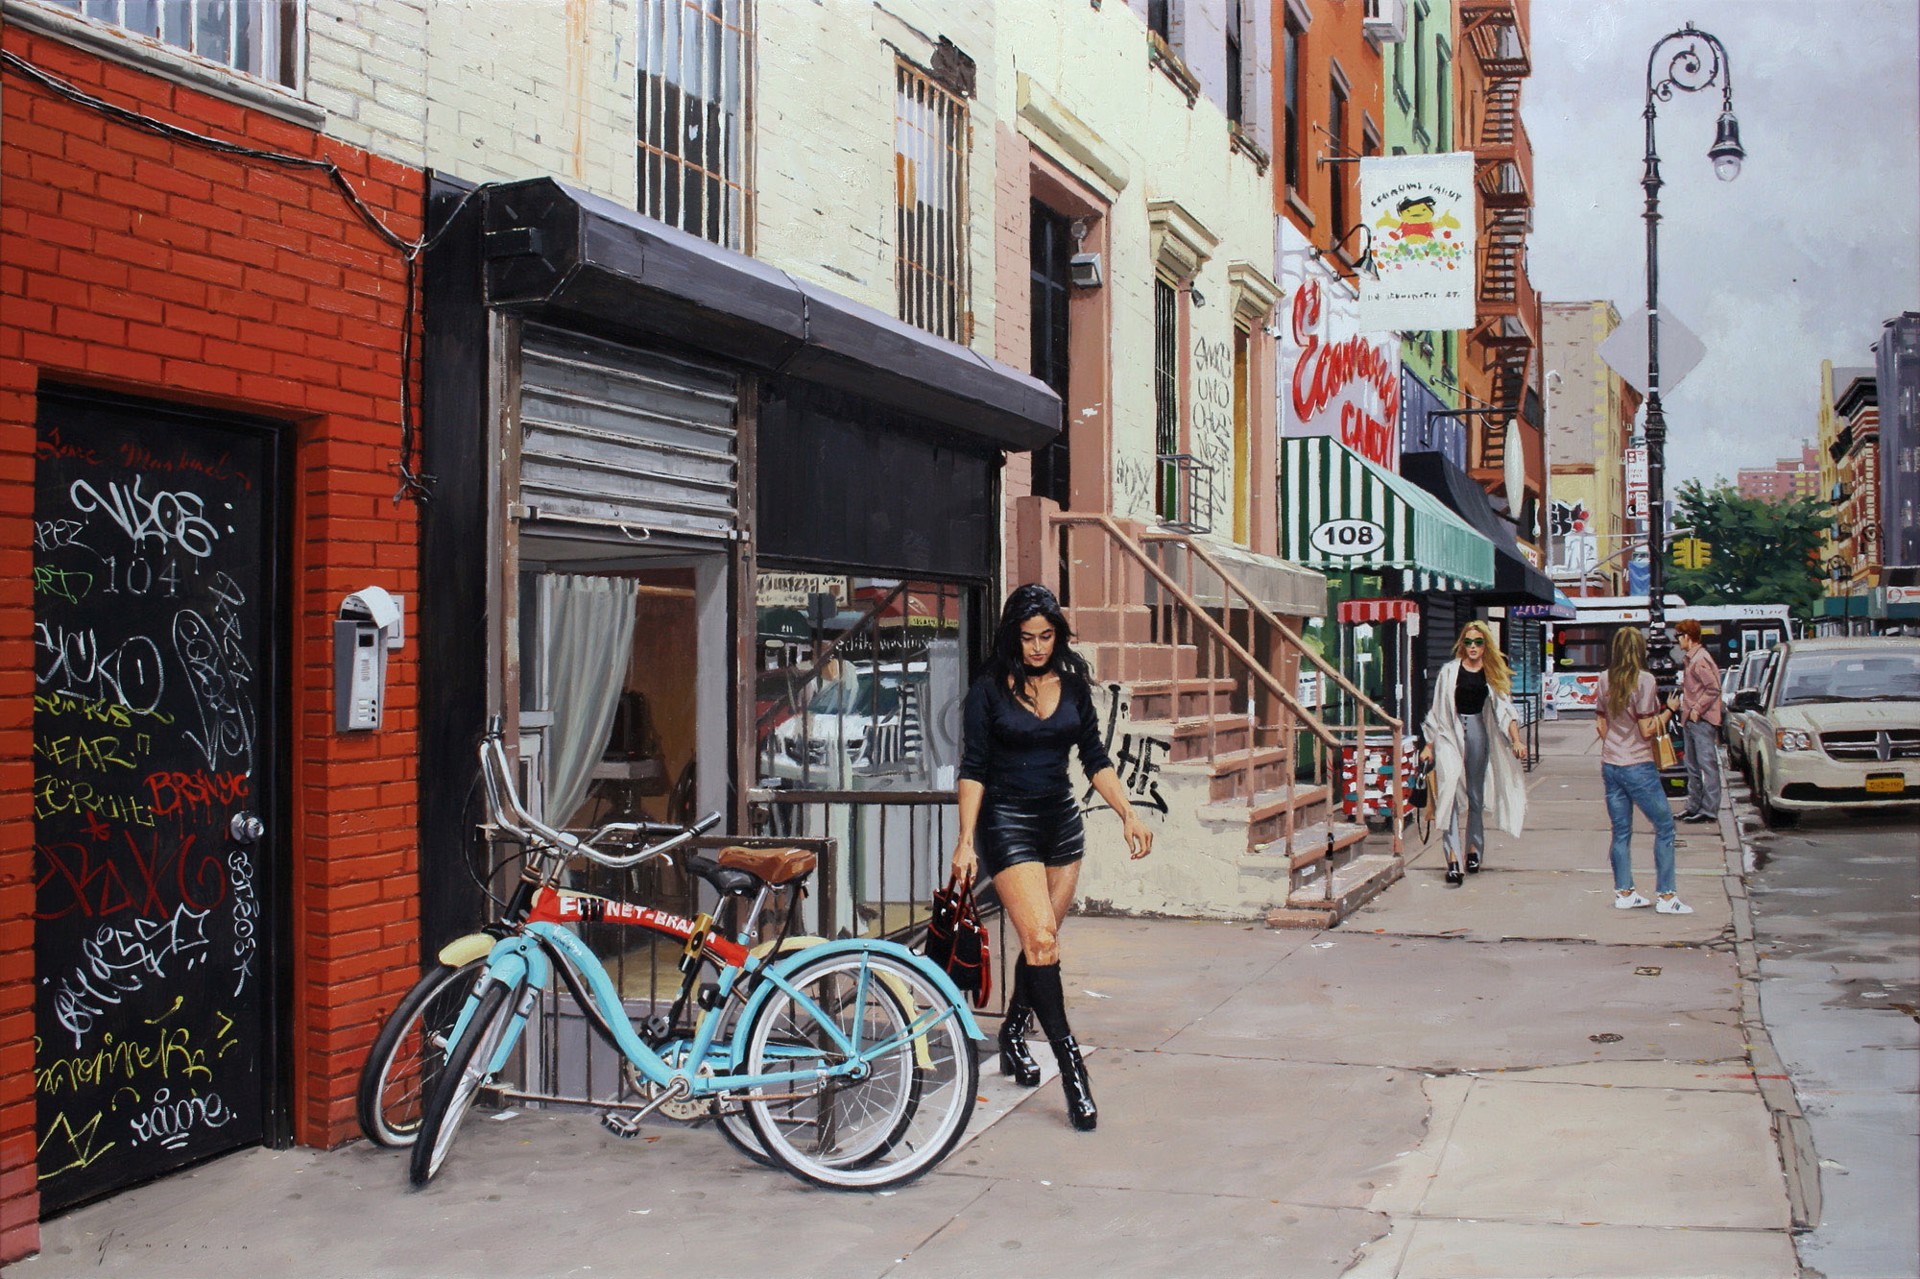 Julie in the Lower East Side by Vincent Giarrano